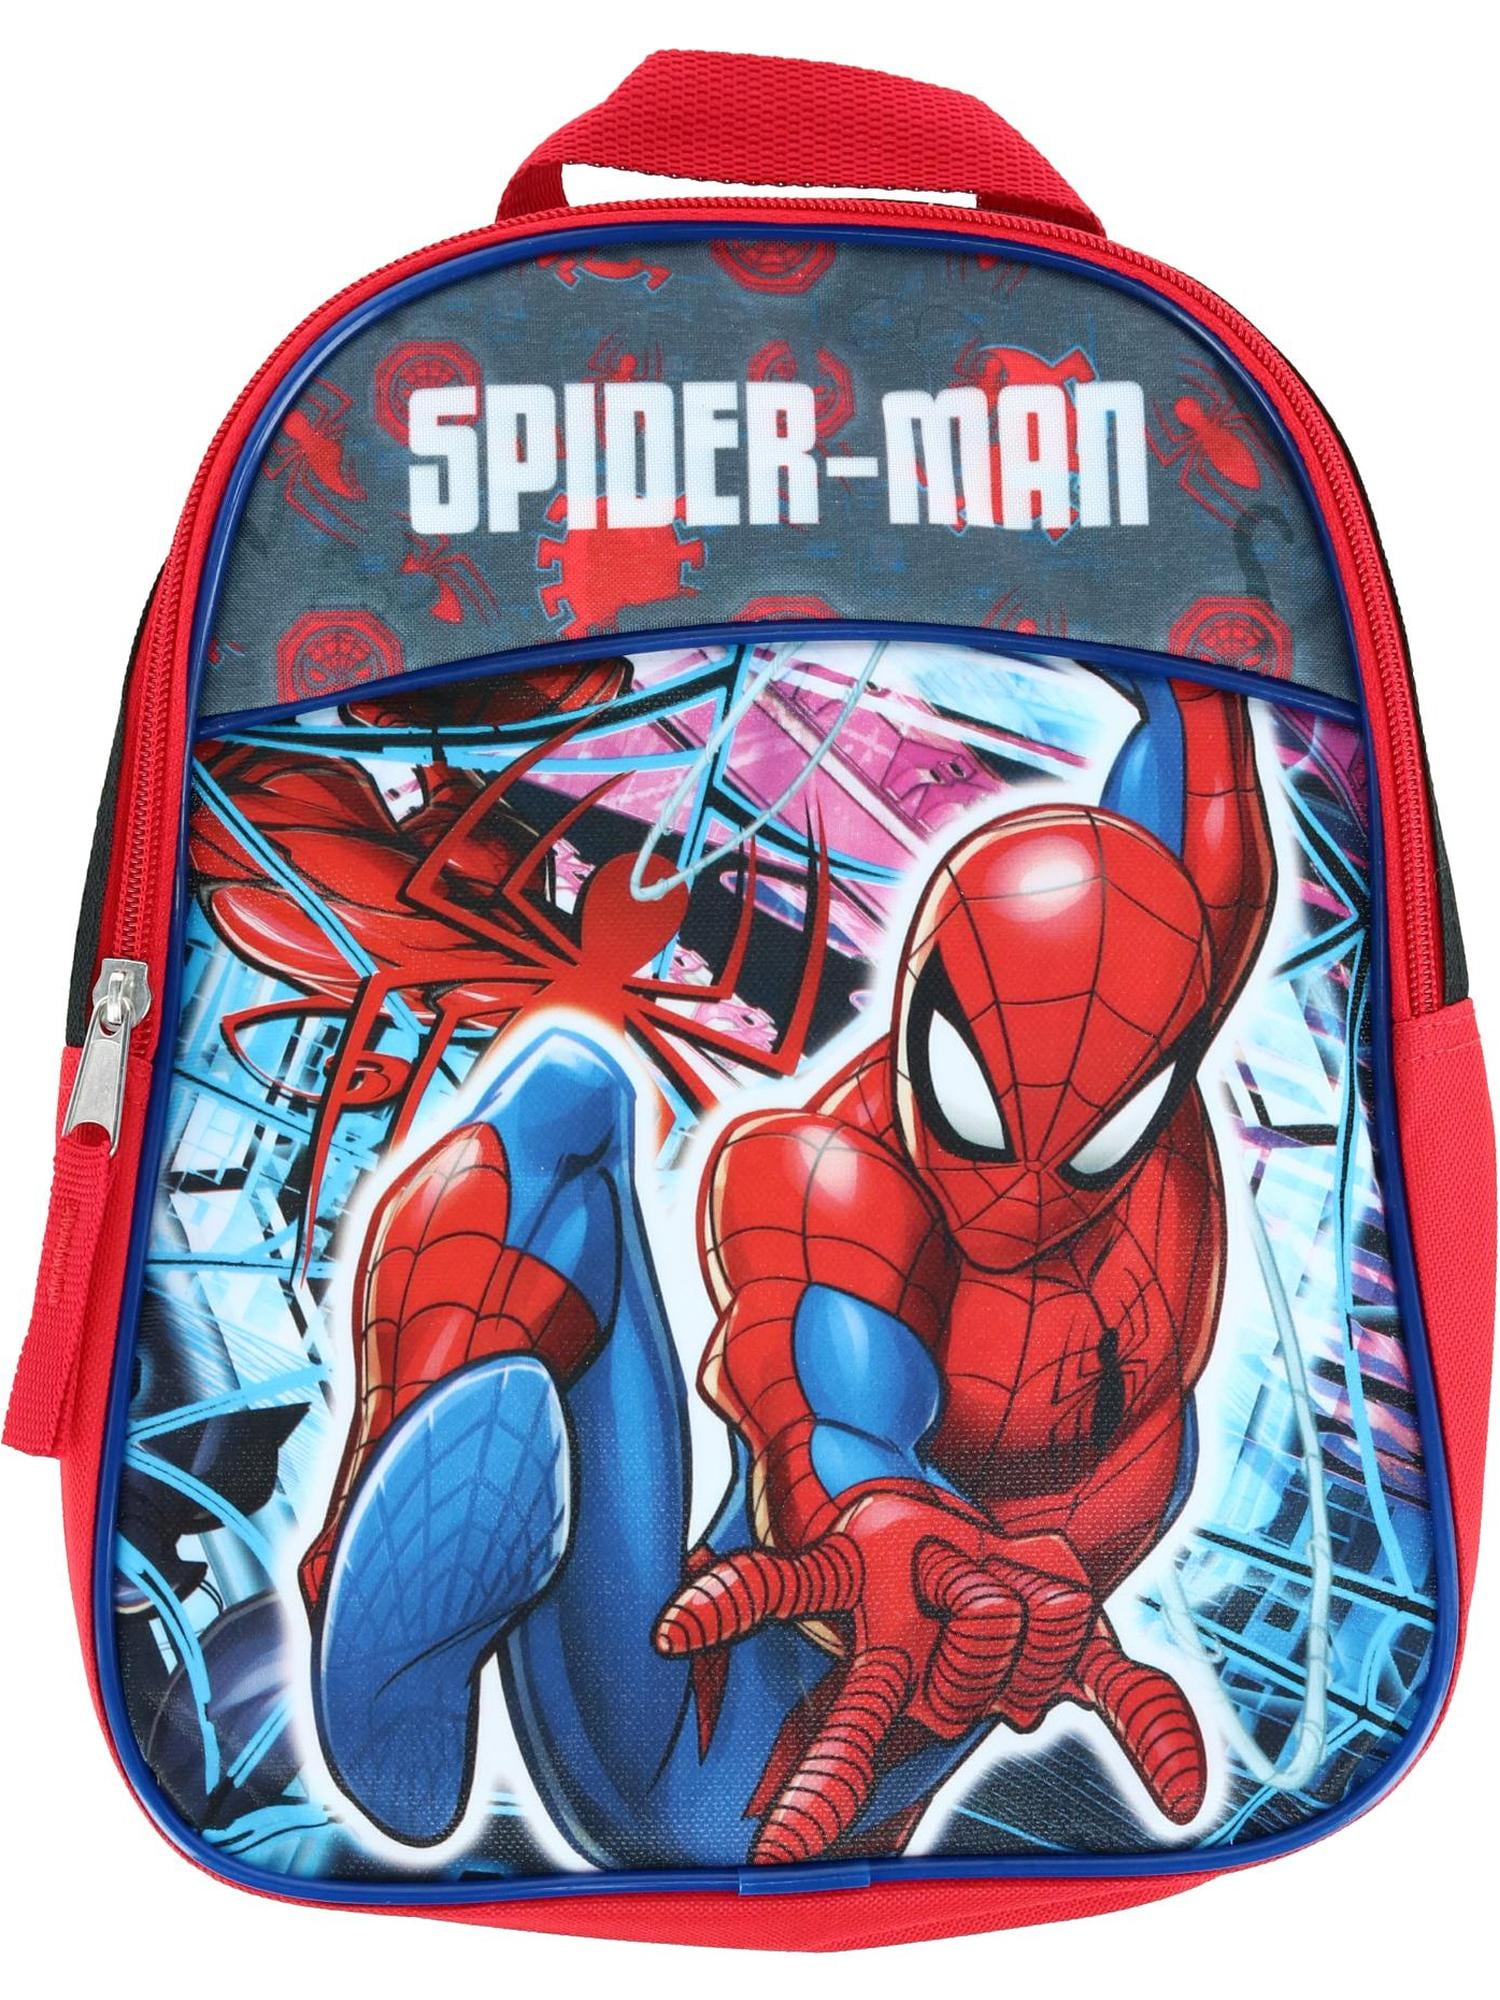 Ultimate Spider-man Backpack with Back to School Supplies 17 Items